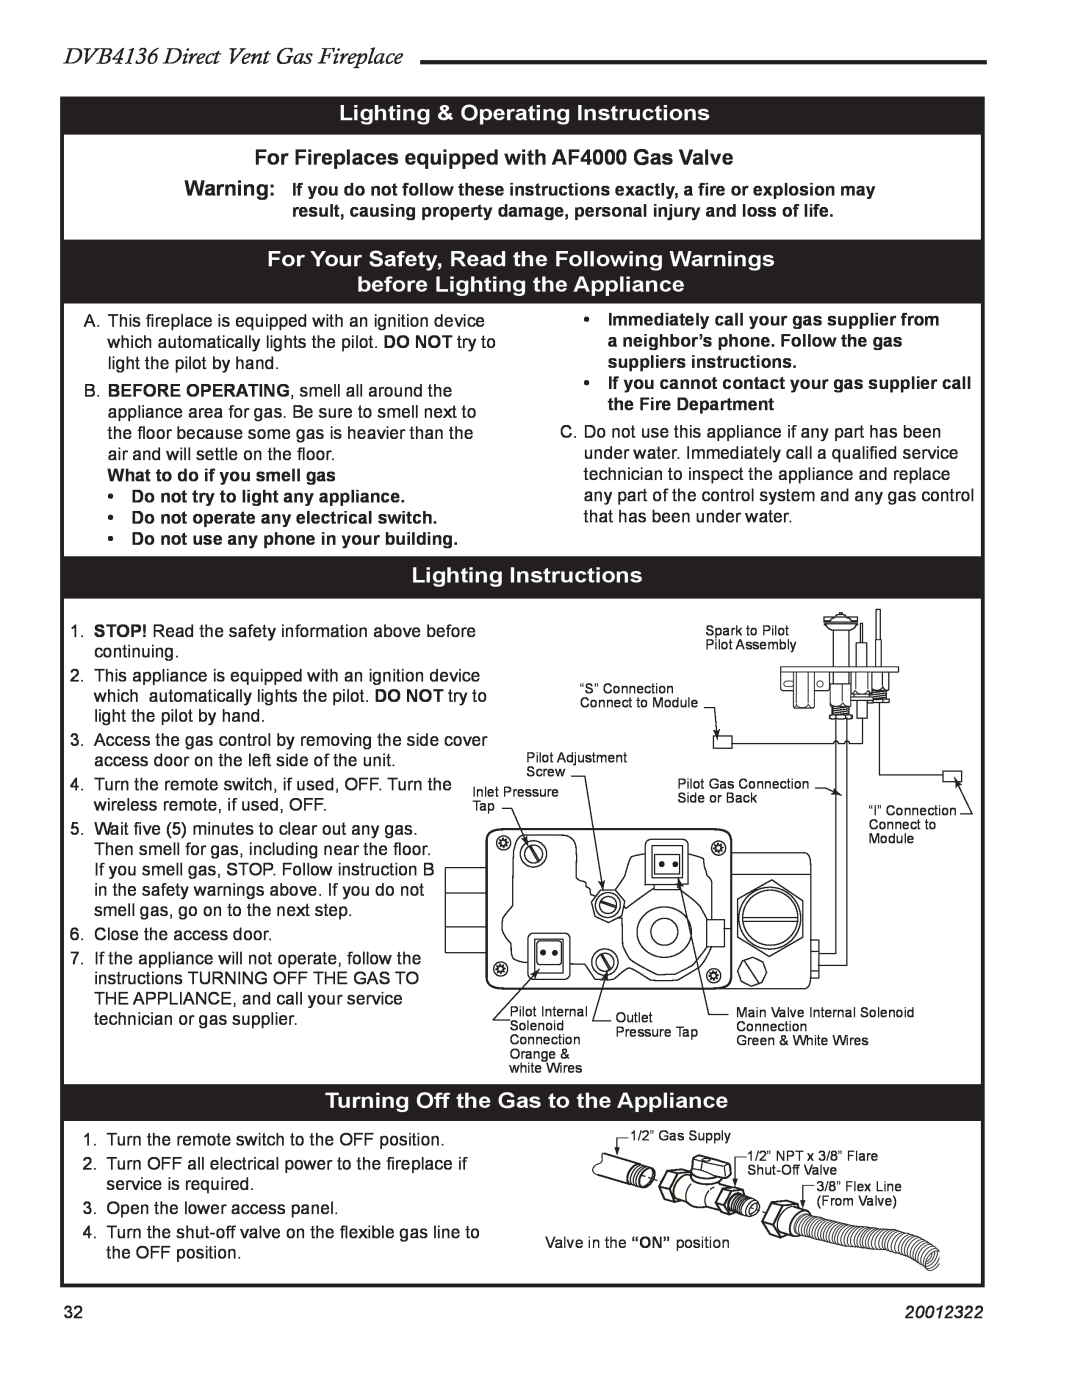 Majestic Appliances DVB4136 Lighting & Operating Instructions, For Your Safety, Read the Following Warnings, 20012322 